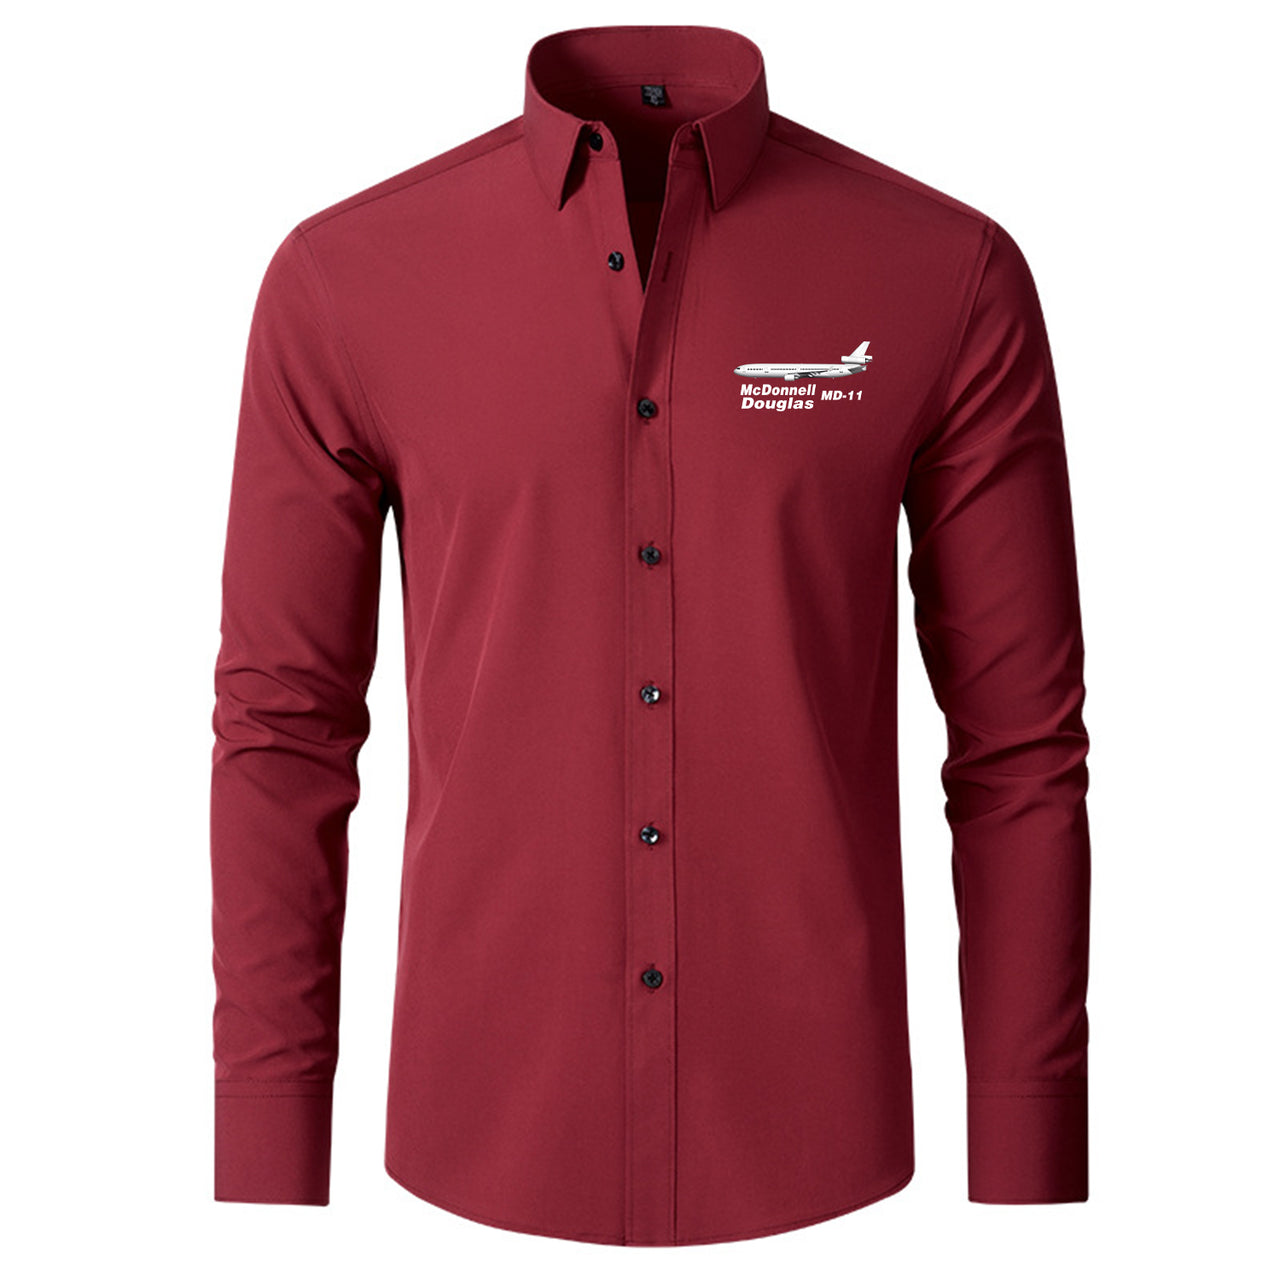 The McDonnell Douglas MD-11 Designed Long Sleeve Shirts